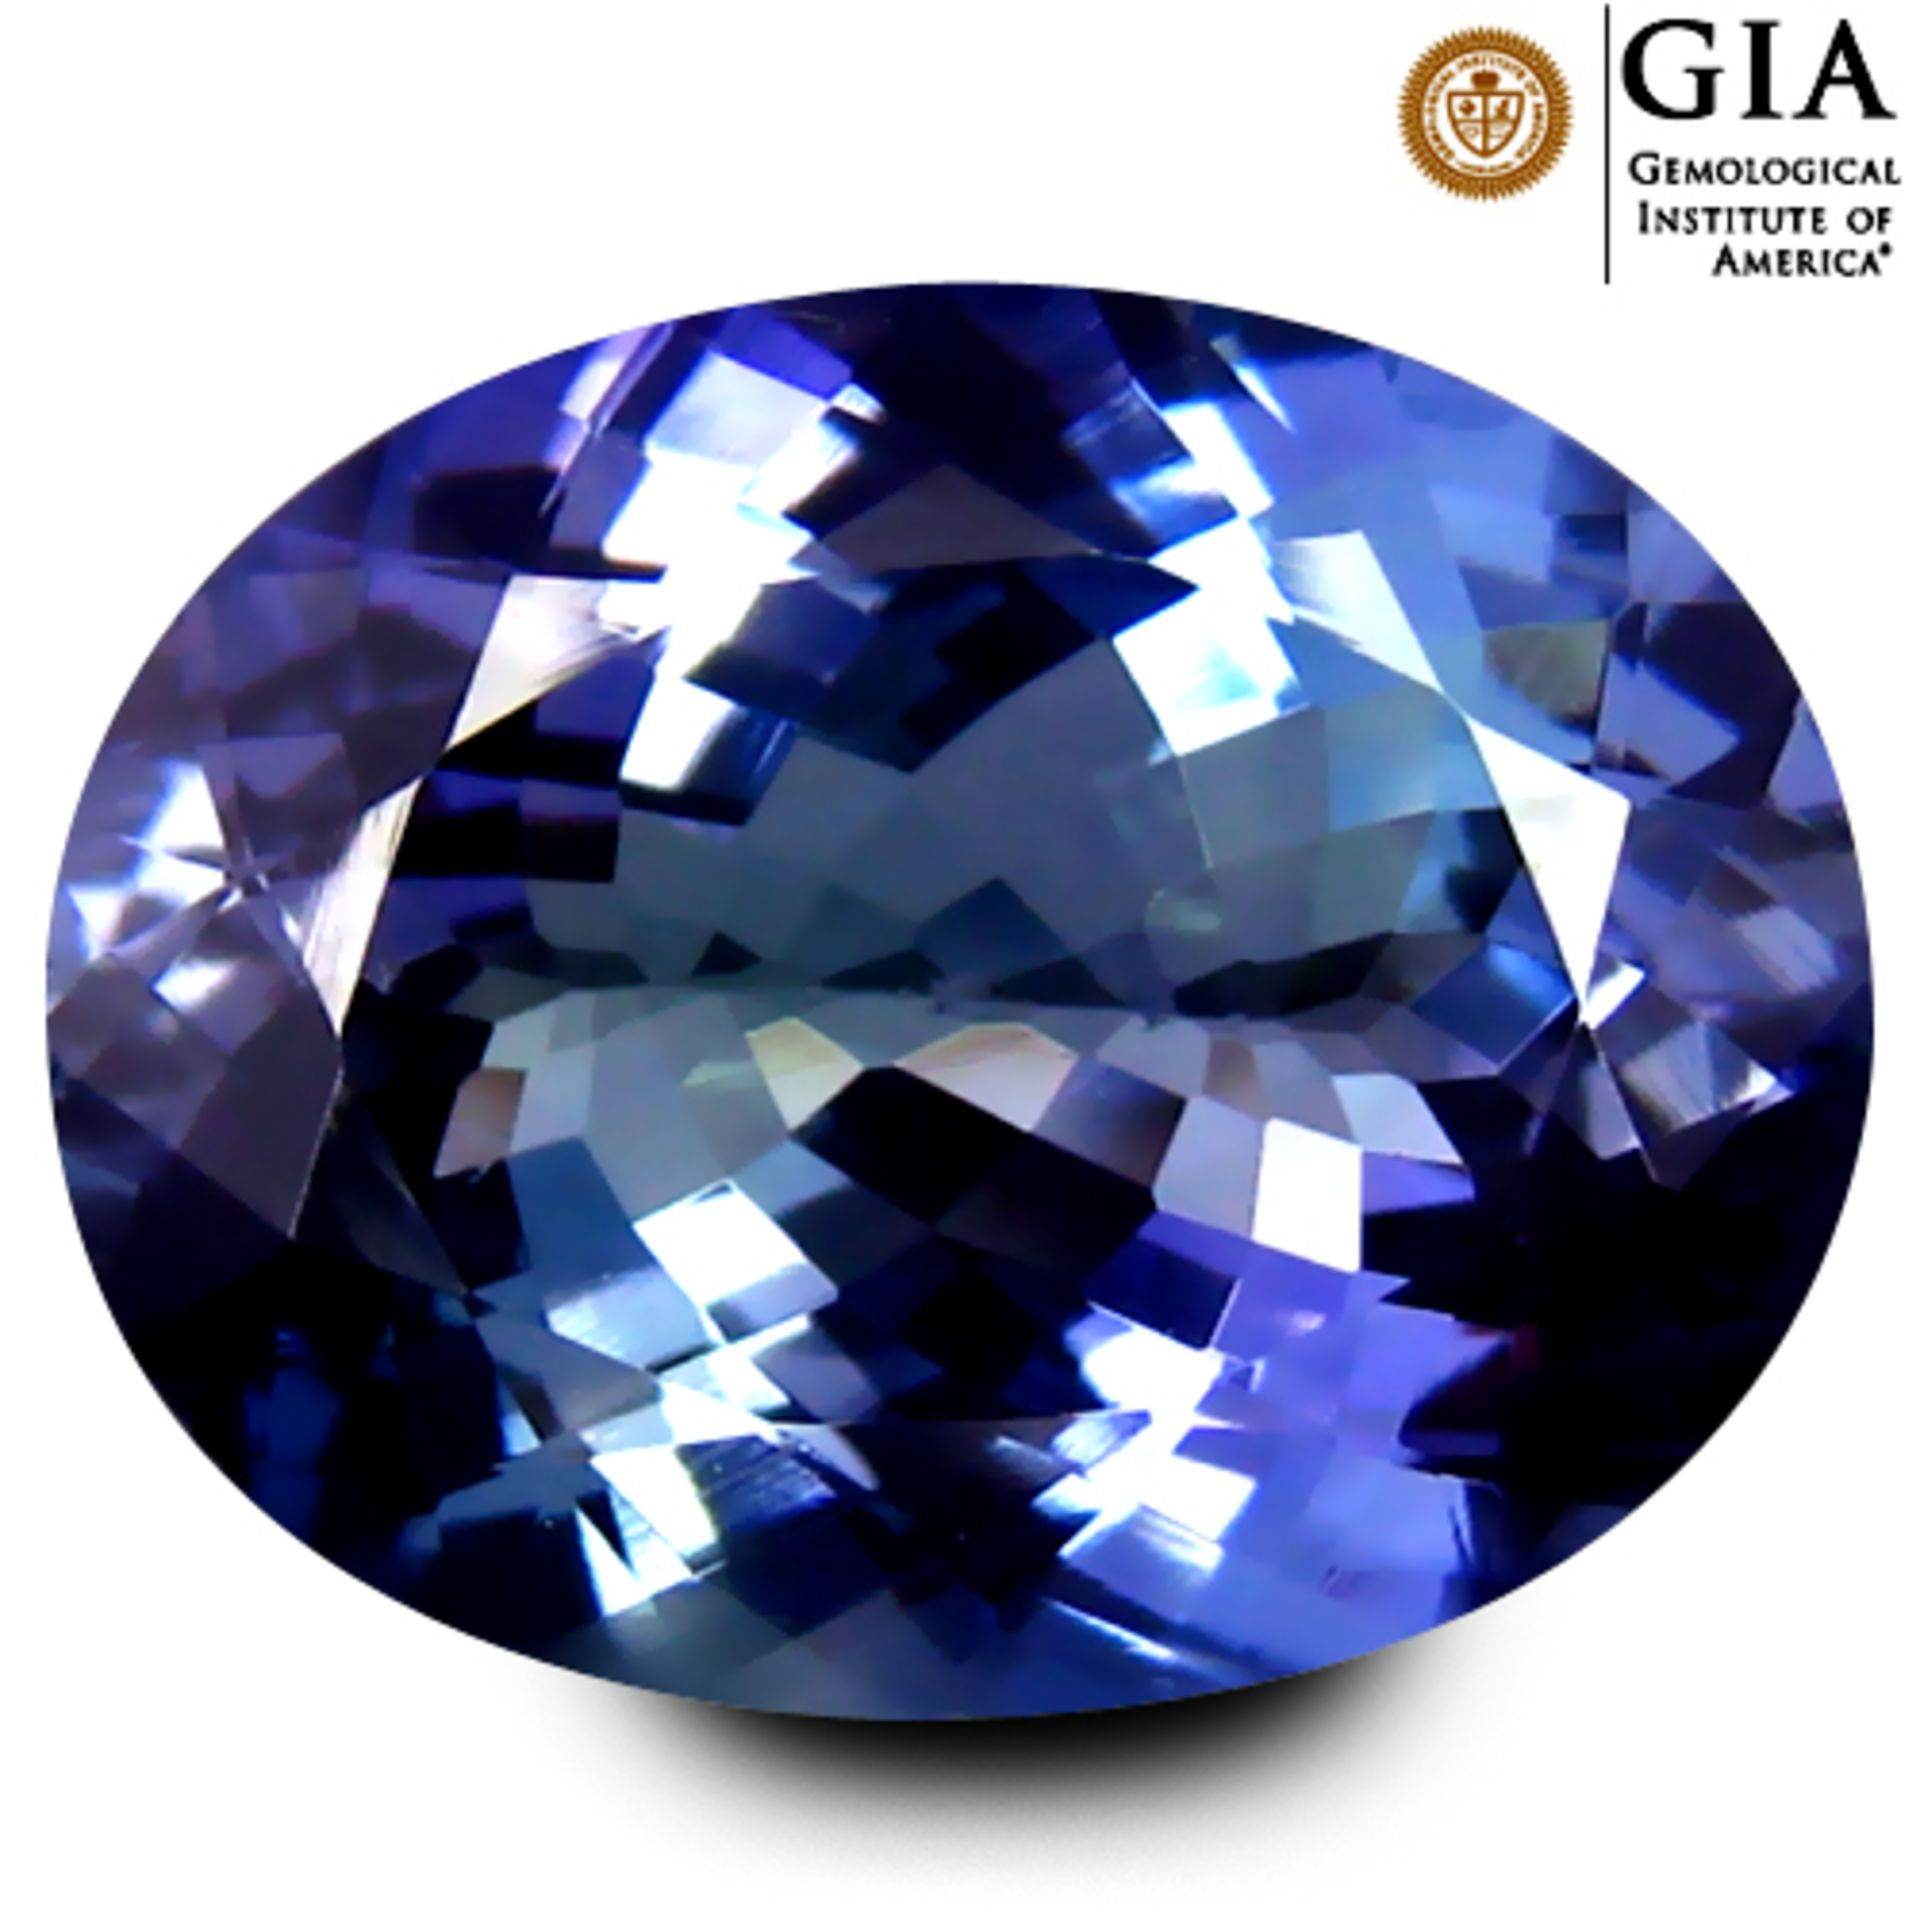 Tanzanite 9.48ct Gem With Certificate - Gem Valued At $11,294.97 (Approx £7369.57)